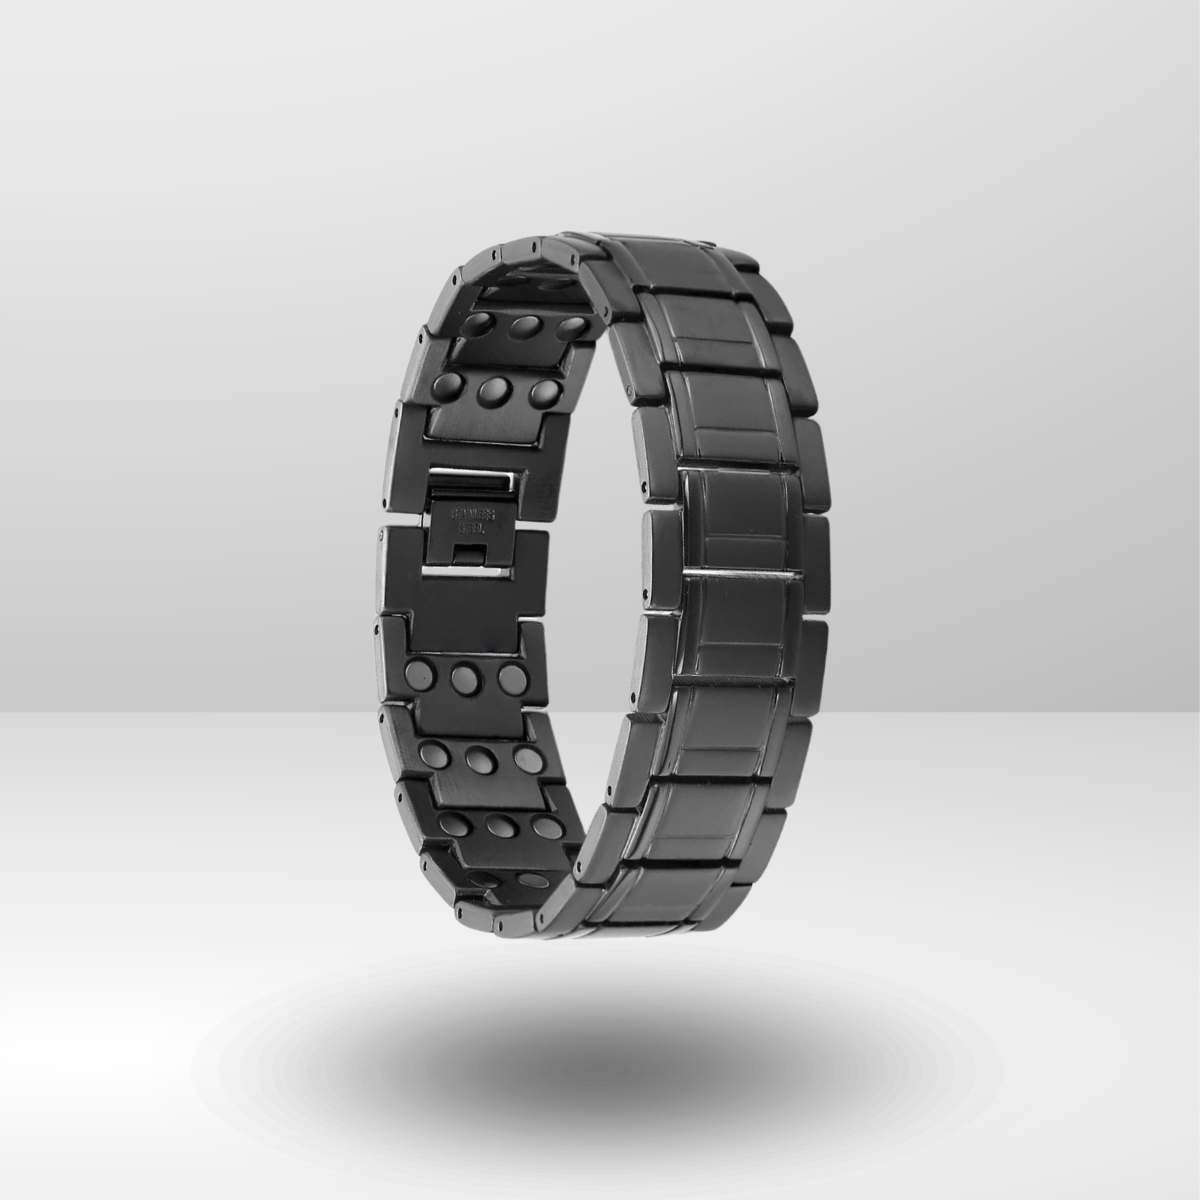 3x Strength Stainless Steel Magnetic Therapy Bracelet for Men